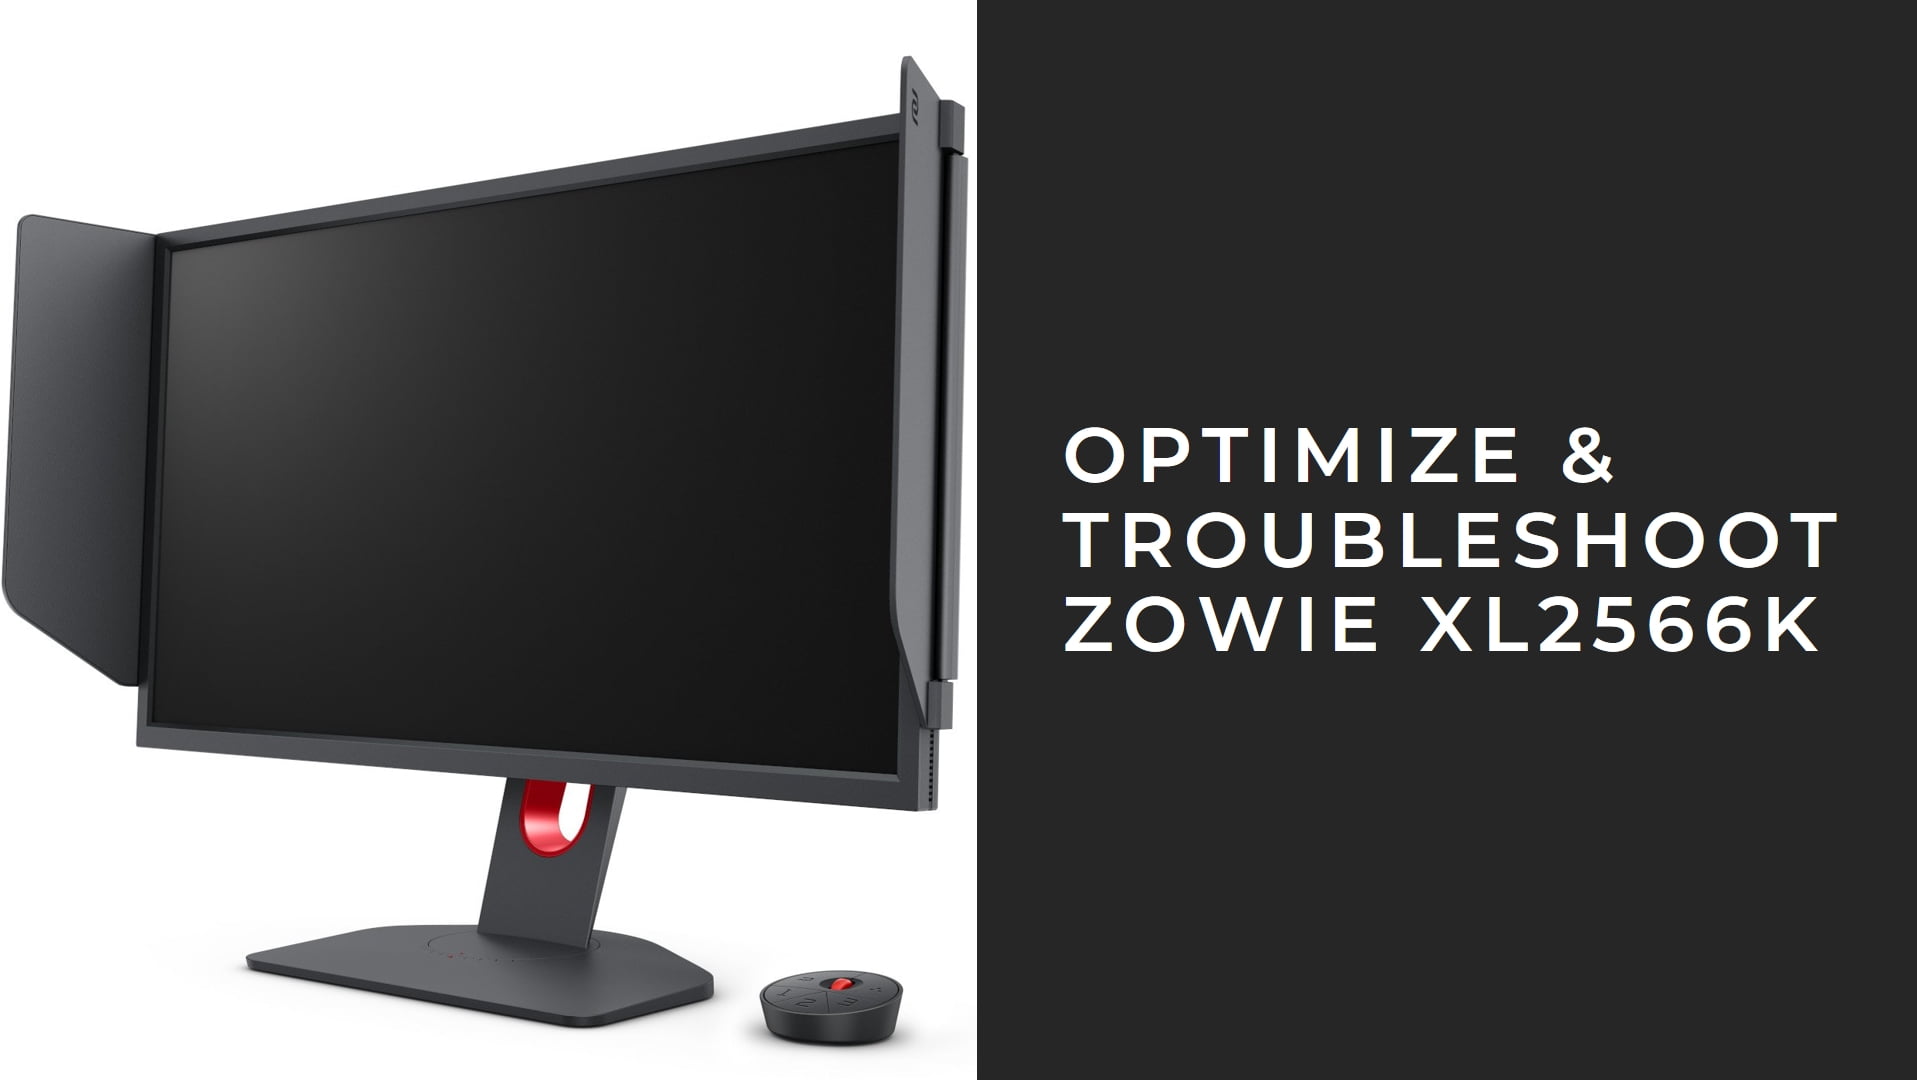 ZOWIE XL2566K Optimization and Troubleshooting Guide